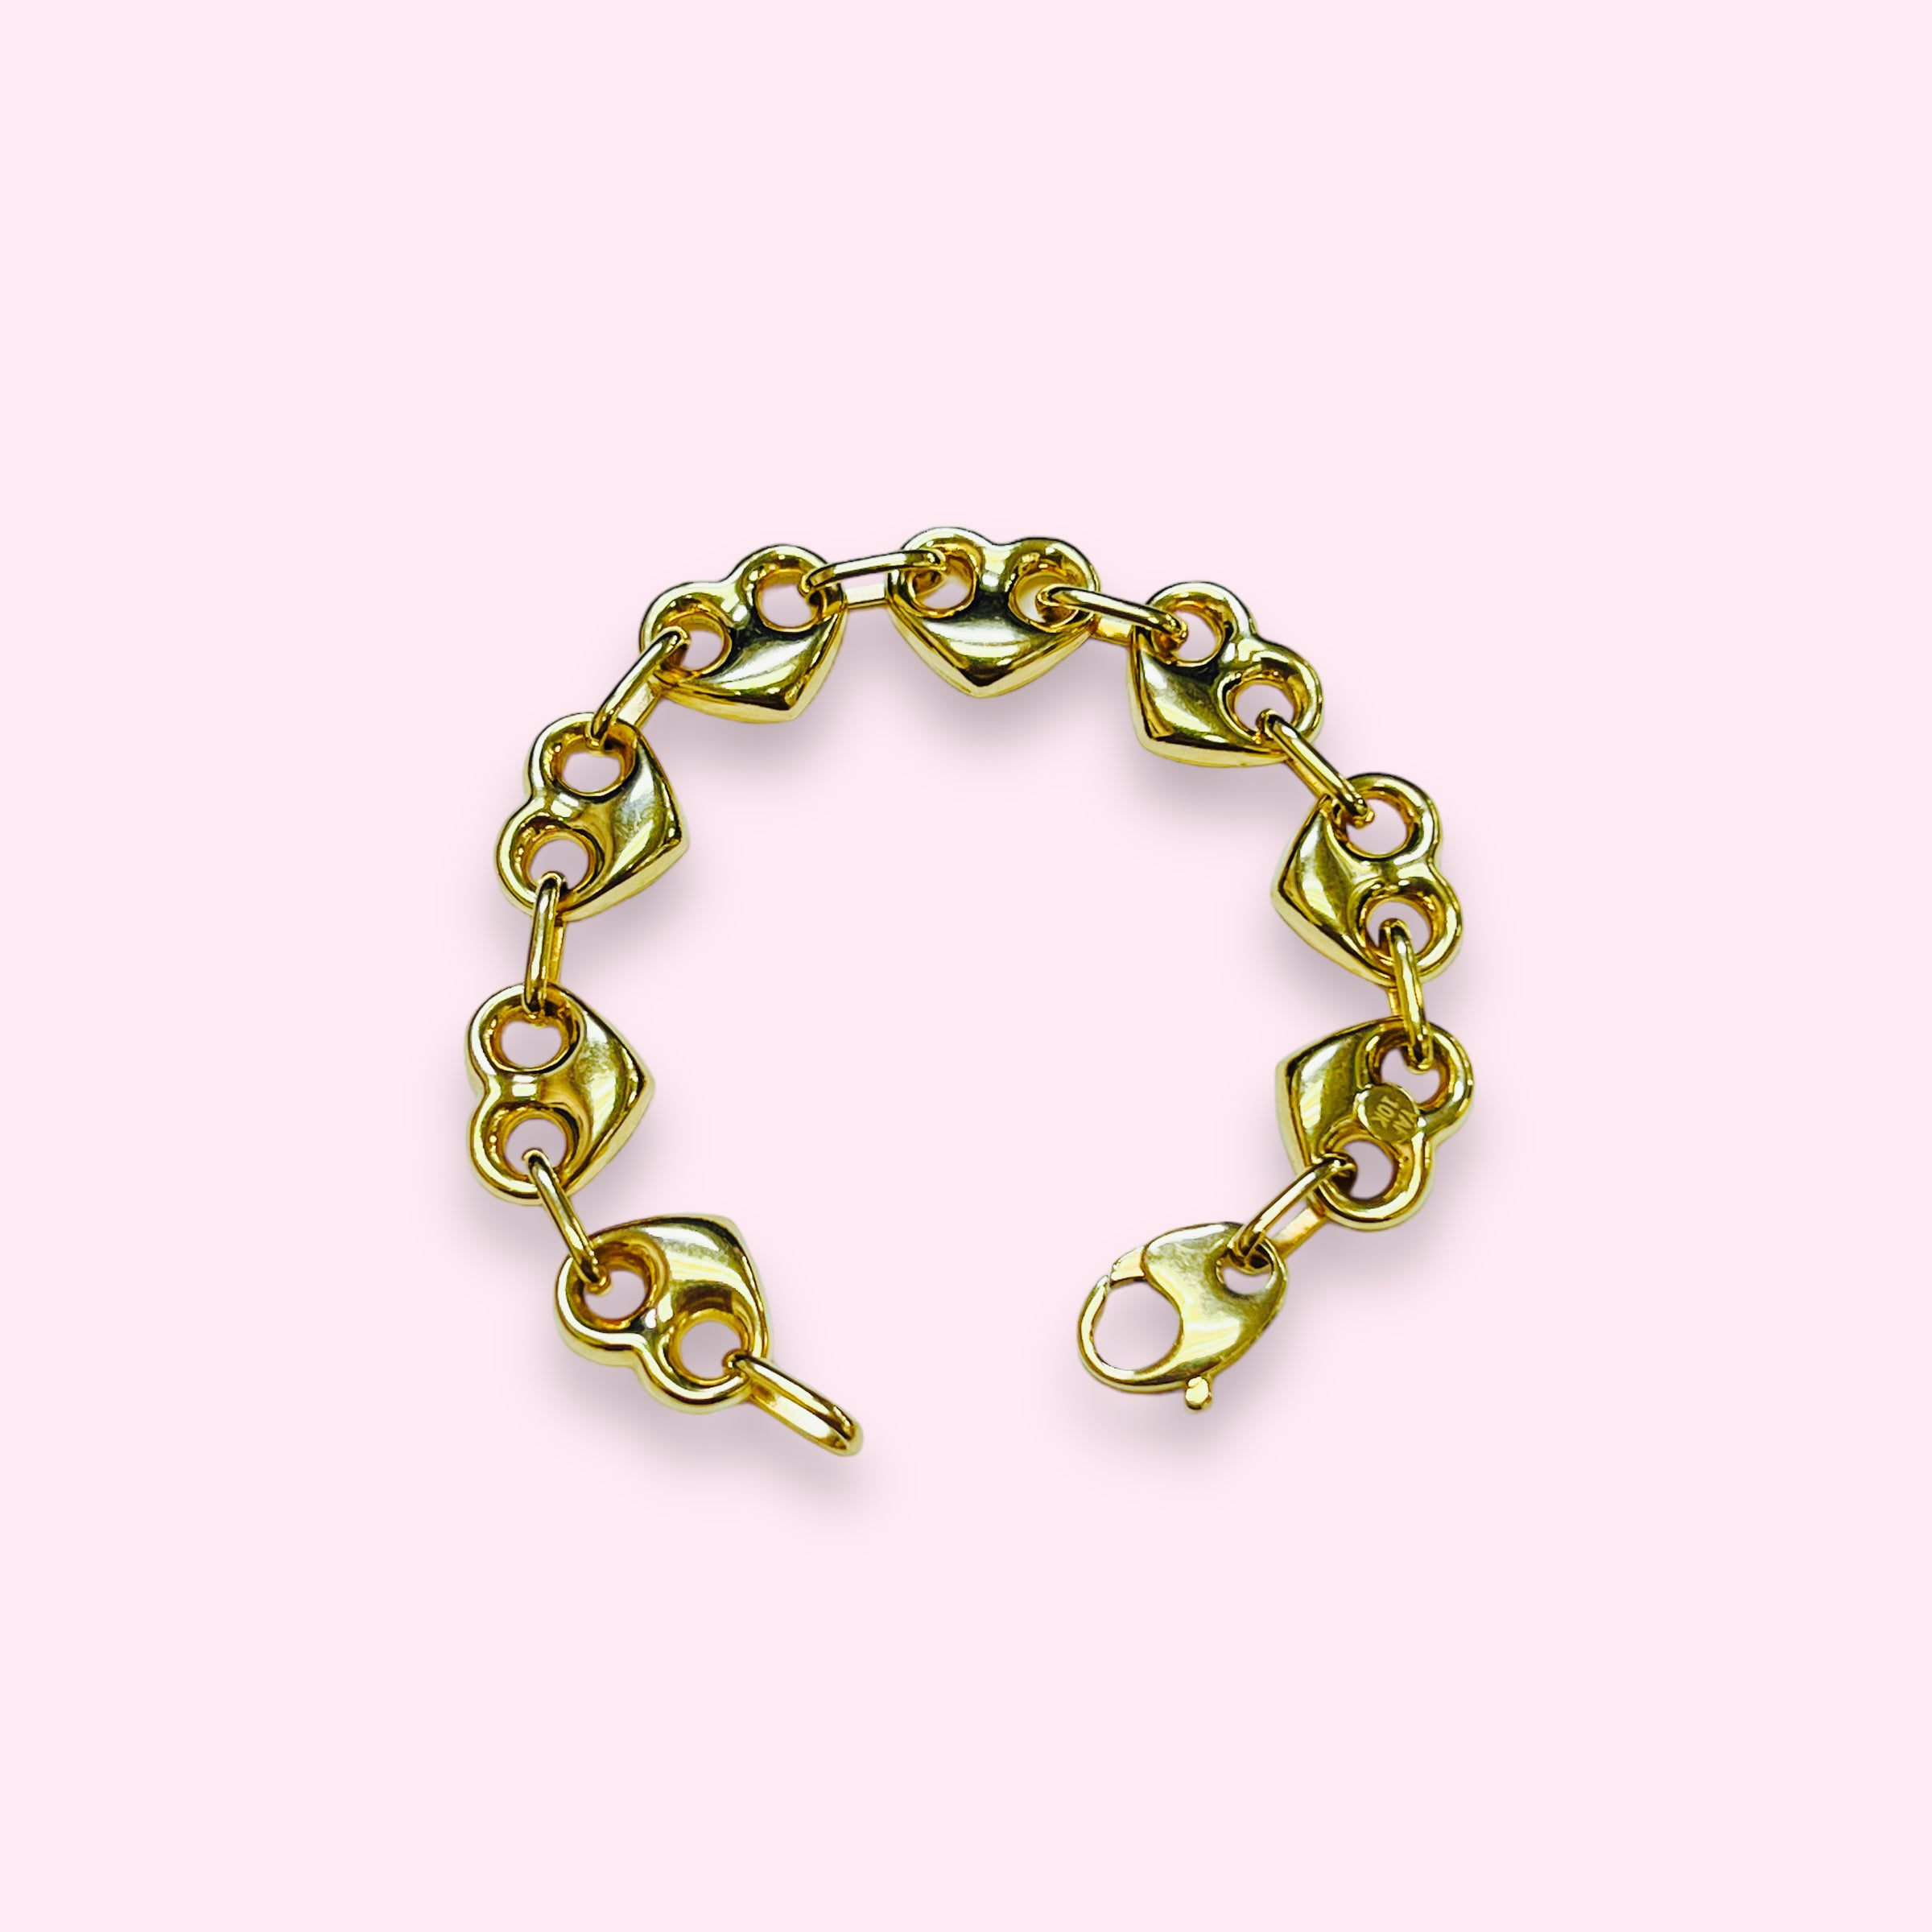 Solid 10K Yellow Gold Wide Heart Gucci Link Bracelet